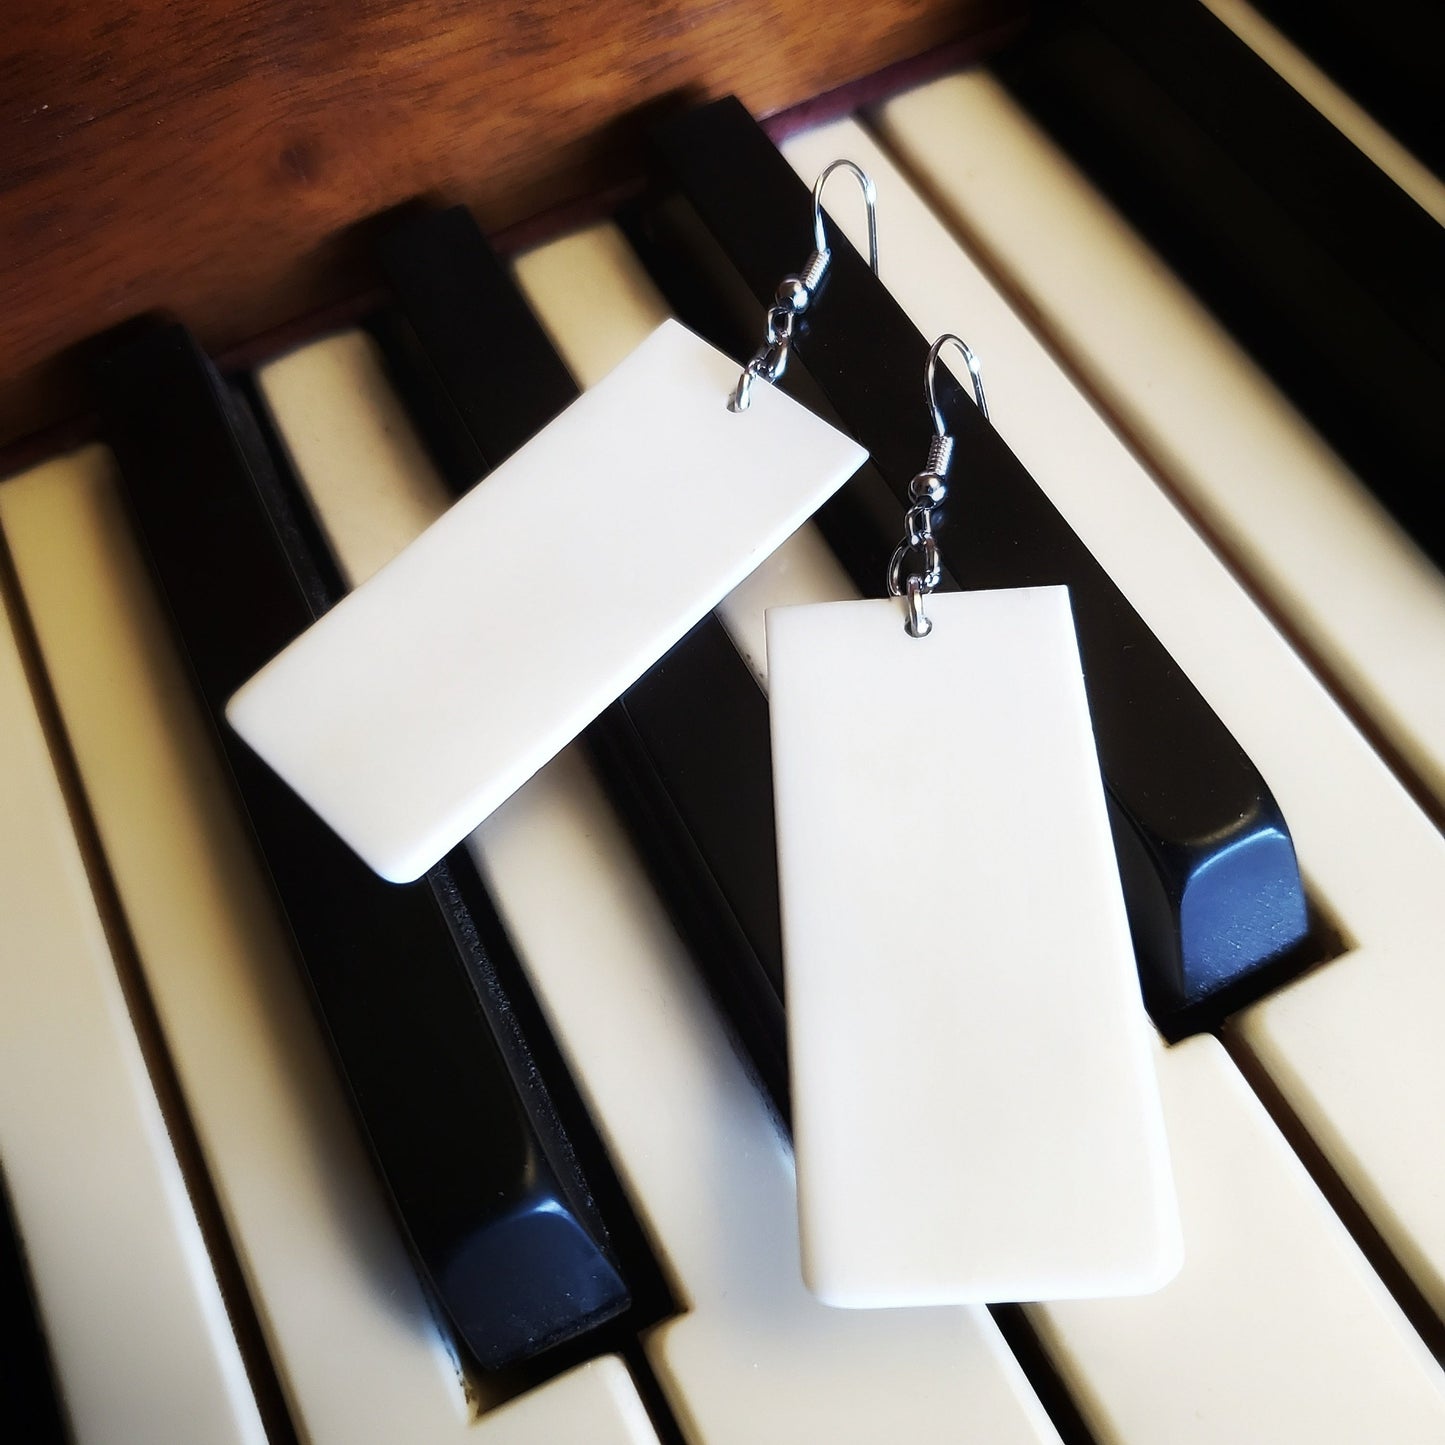 a pair of earrings made from upcycled ivory piano key toppers - the earrings sit on piano keys